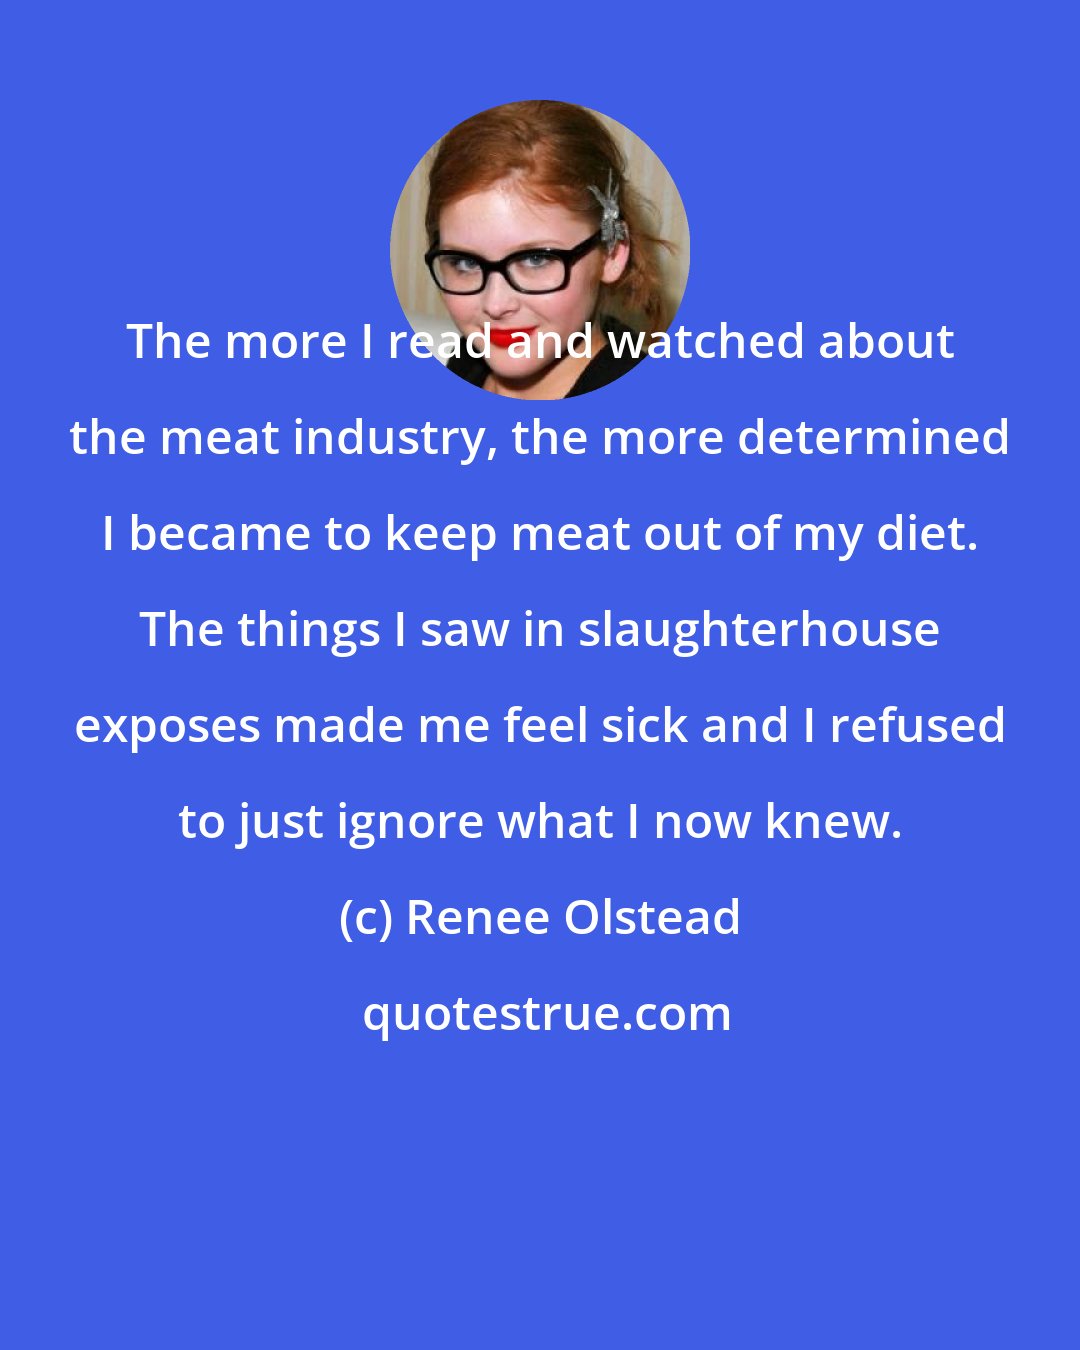 Renee Olstead: The more I read and watched about the meat industry, the more determined I became to keep meat out of my diet. The things I saw in slaughterhouse exposes made me feel sick and I refused to just ignore what I now knew.